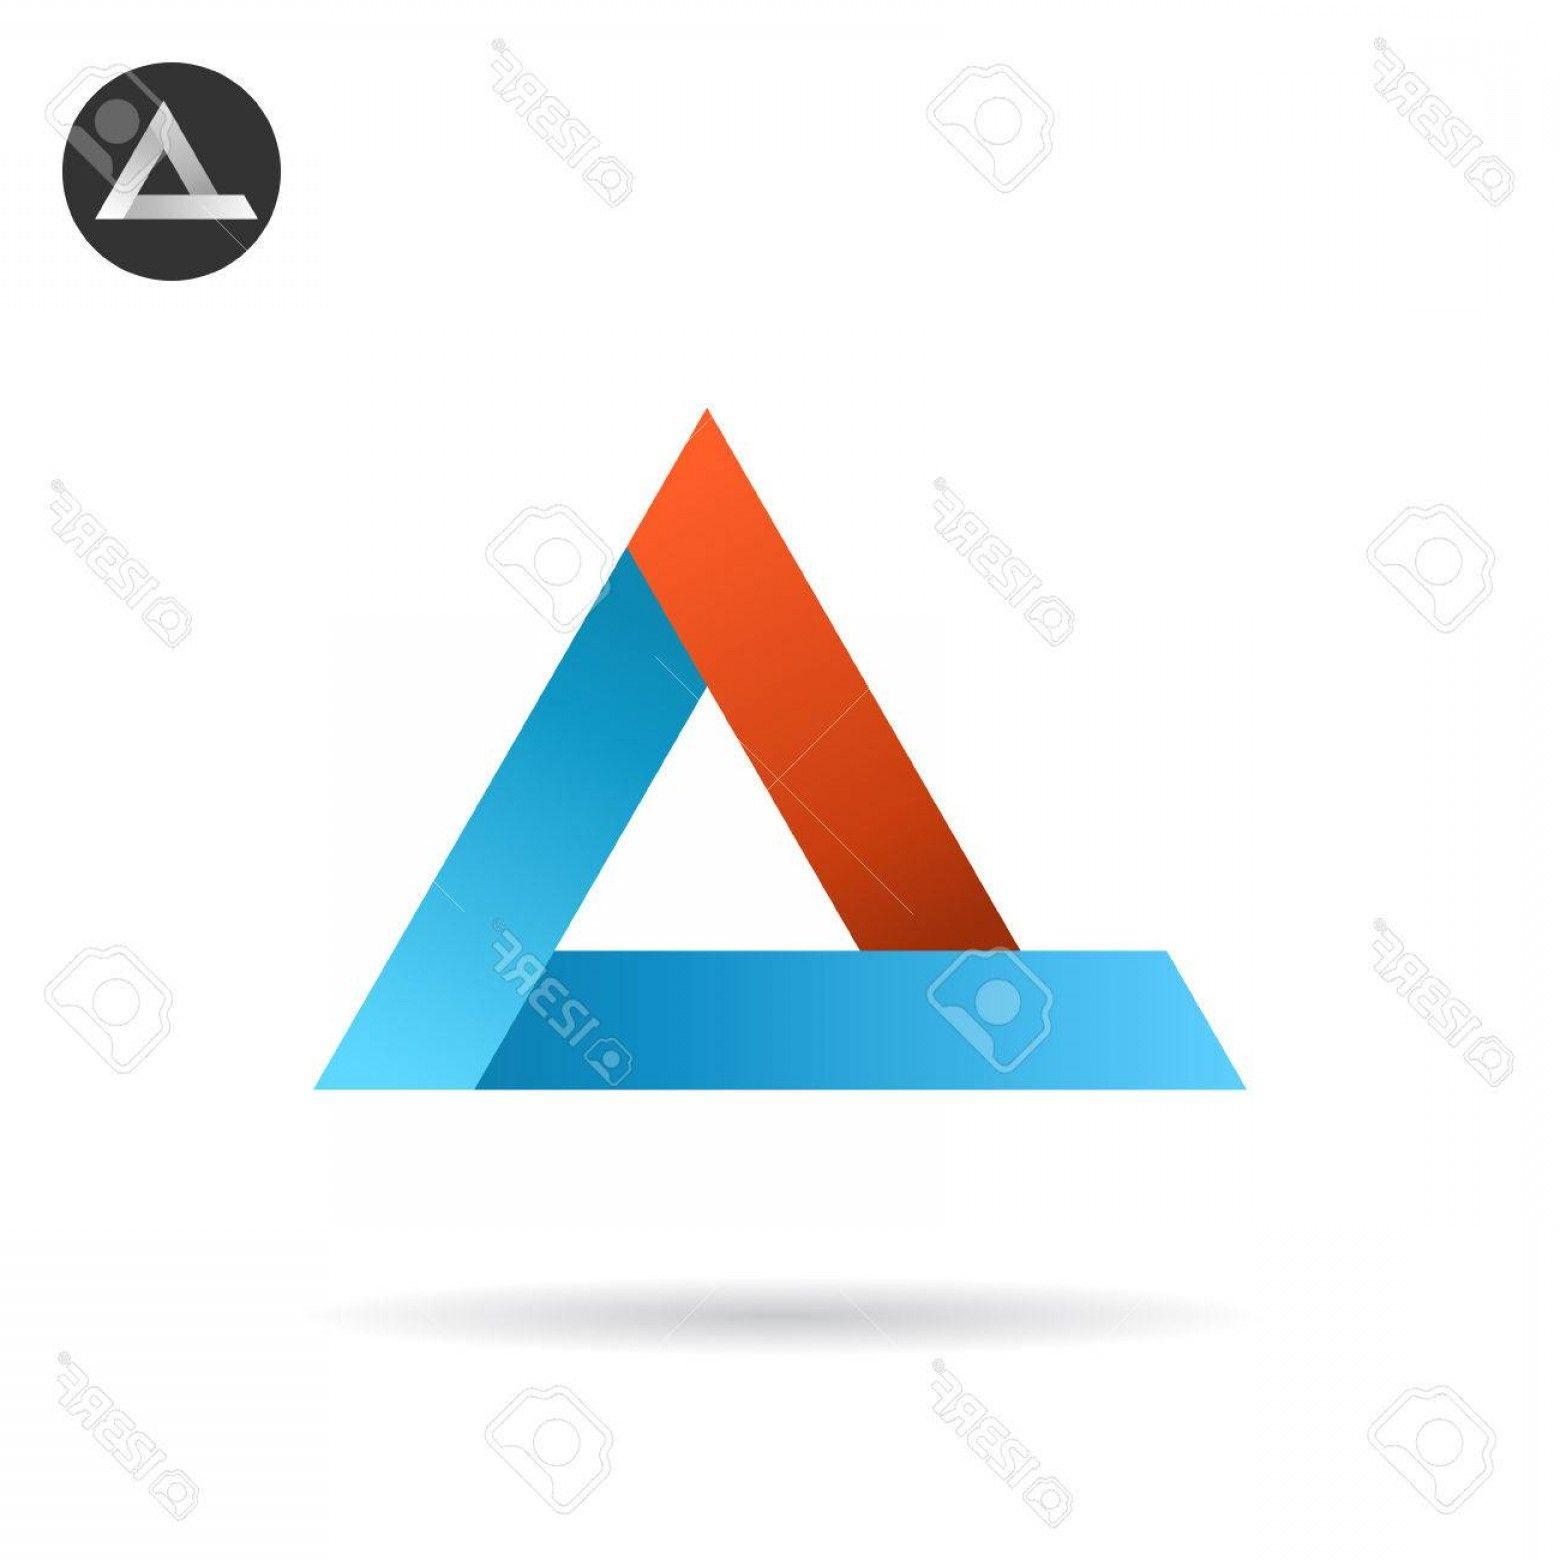 White and Blue D-Logo Logo - Photostock Vector Delta Arrow Logo In Ribbon Style Red And Blue